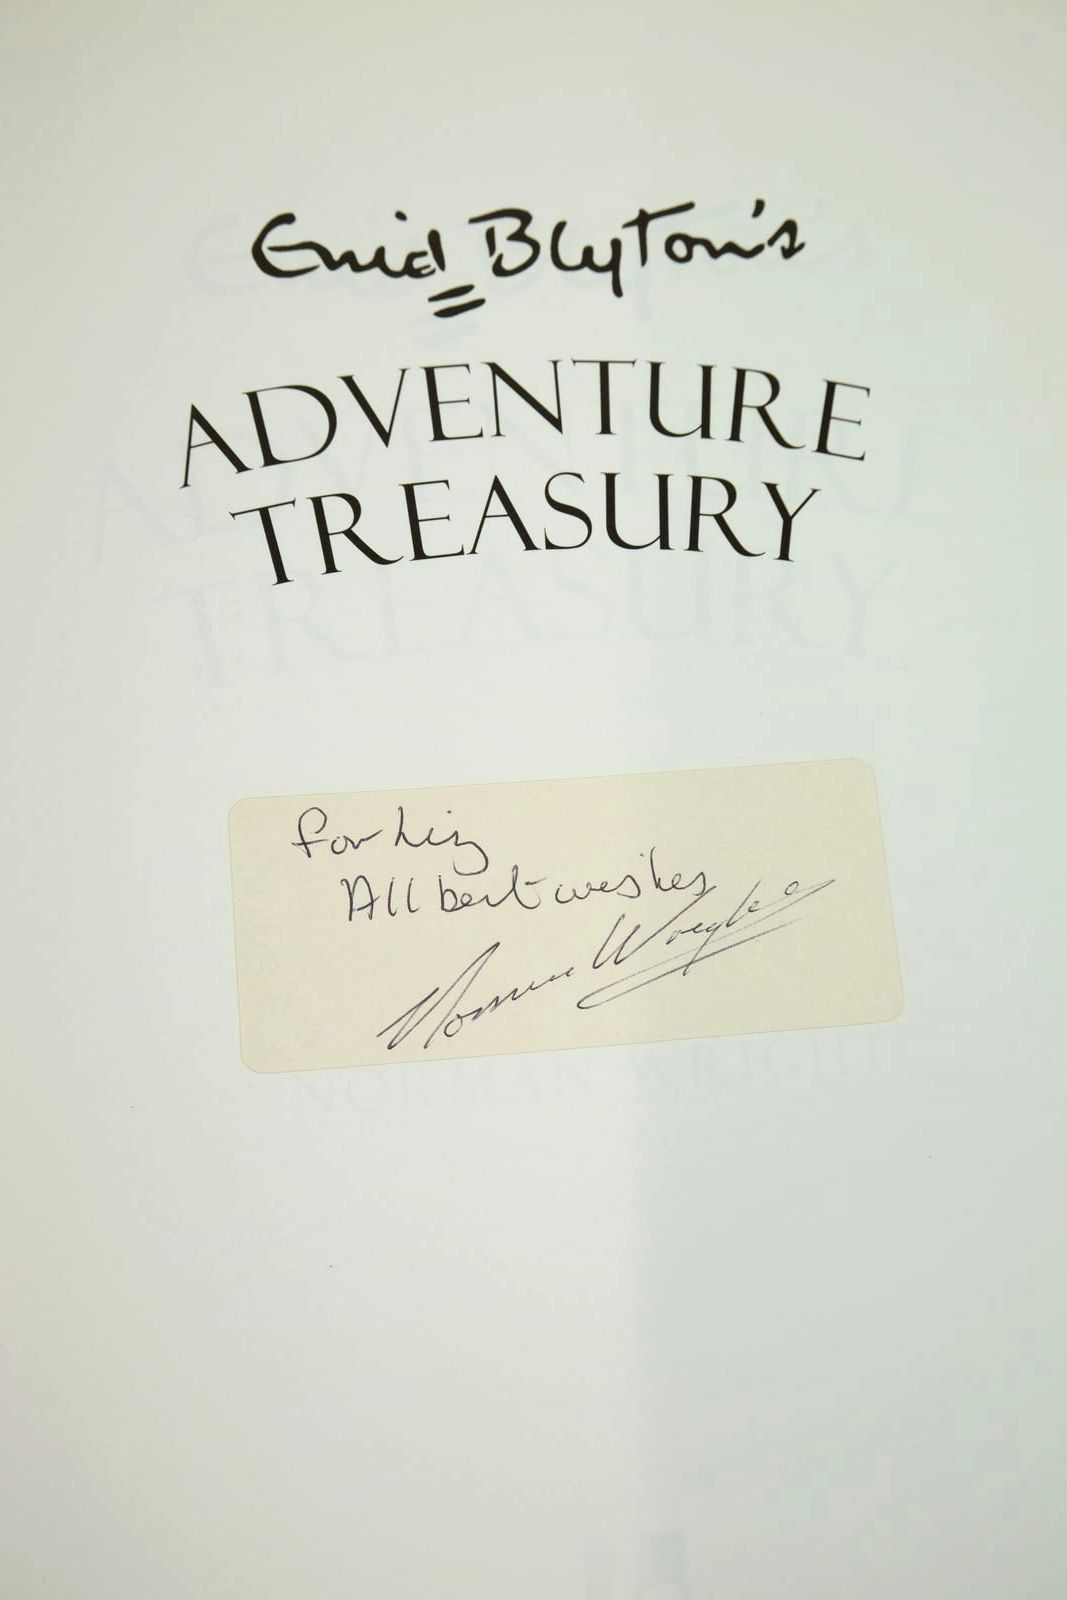 Photo of ENID BLYTON'S ADVENTURE TREASURY written by Blyton, Enid
Cadogan, Mary
Wright, Norman published by Hodder Children's Books (STOCK CODE: 1321196)  for sale by Stella & Rose's Books